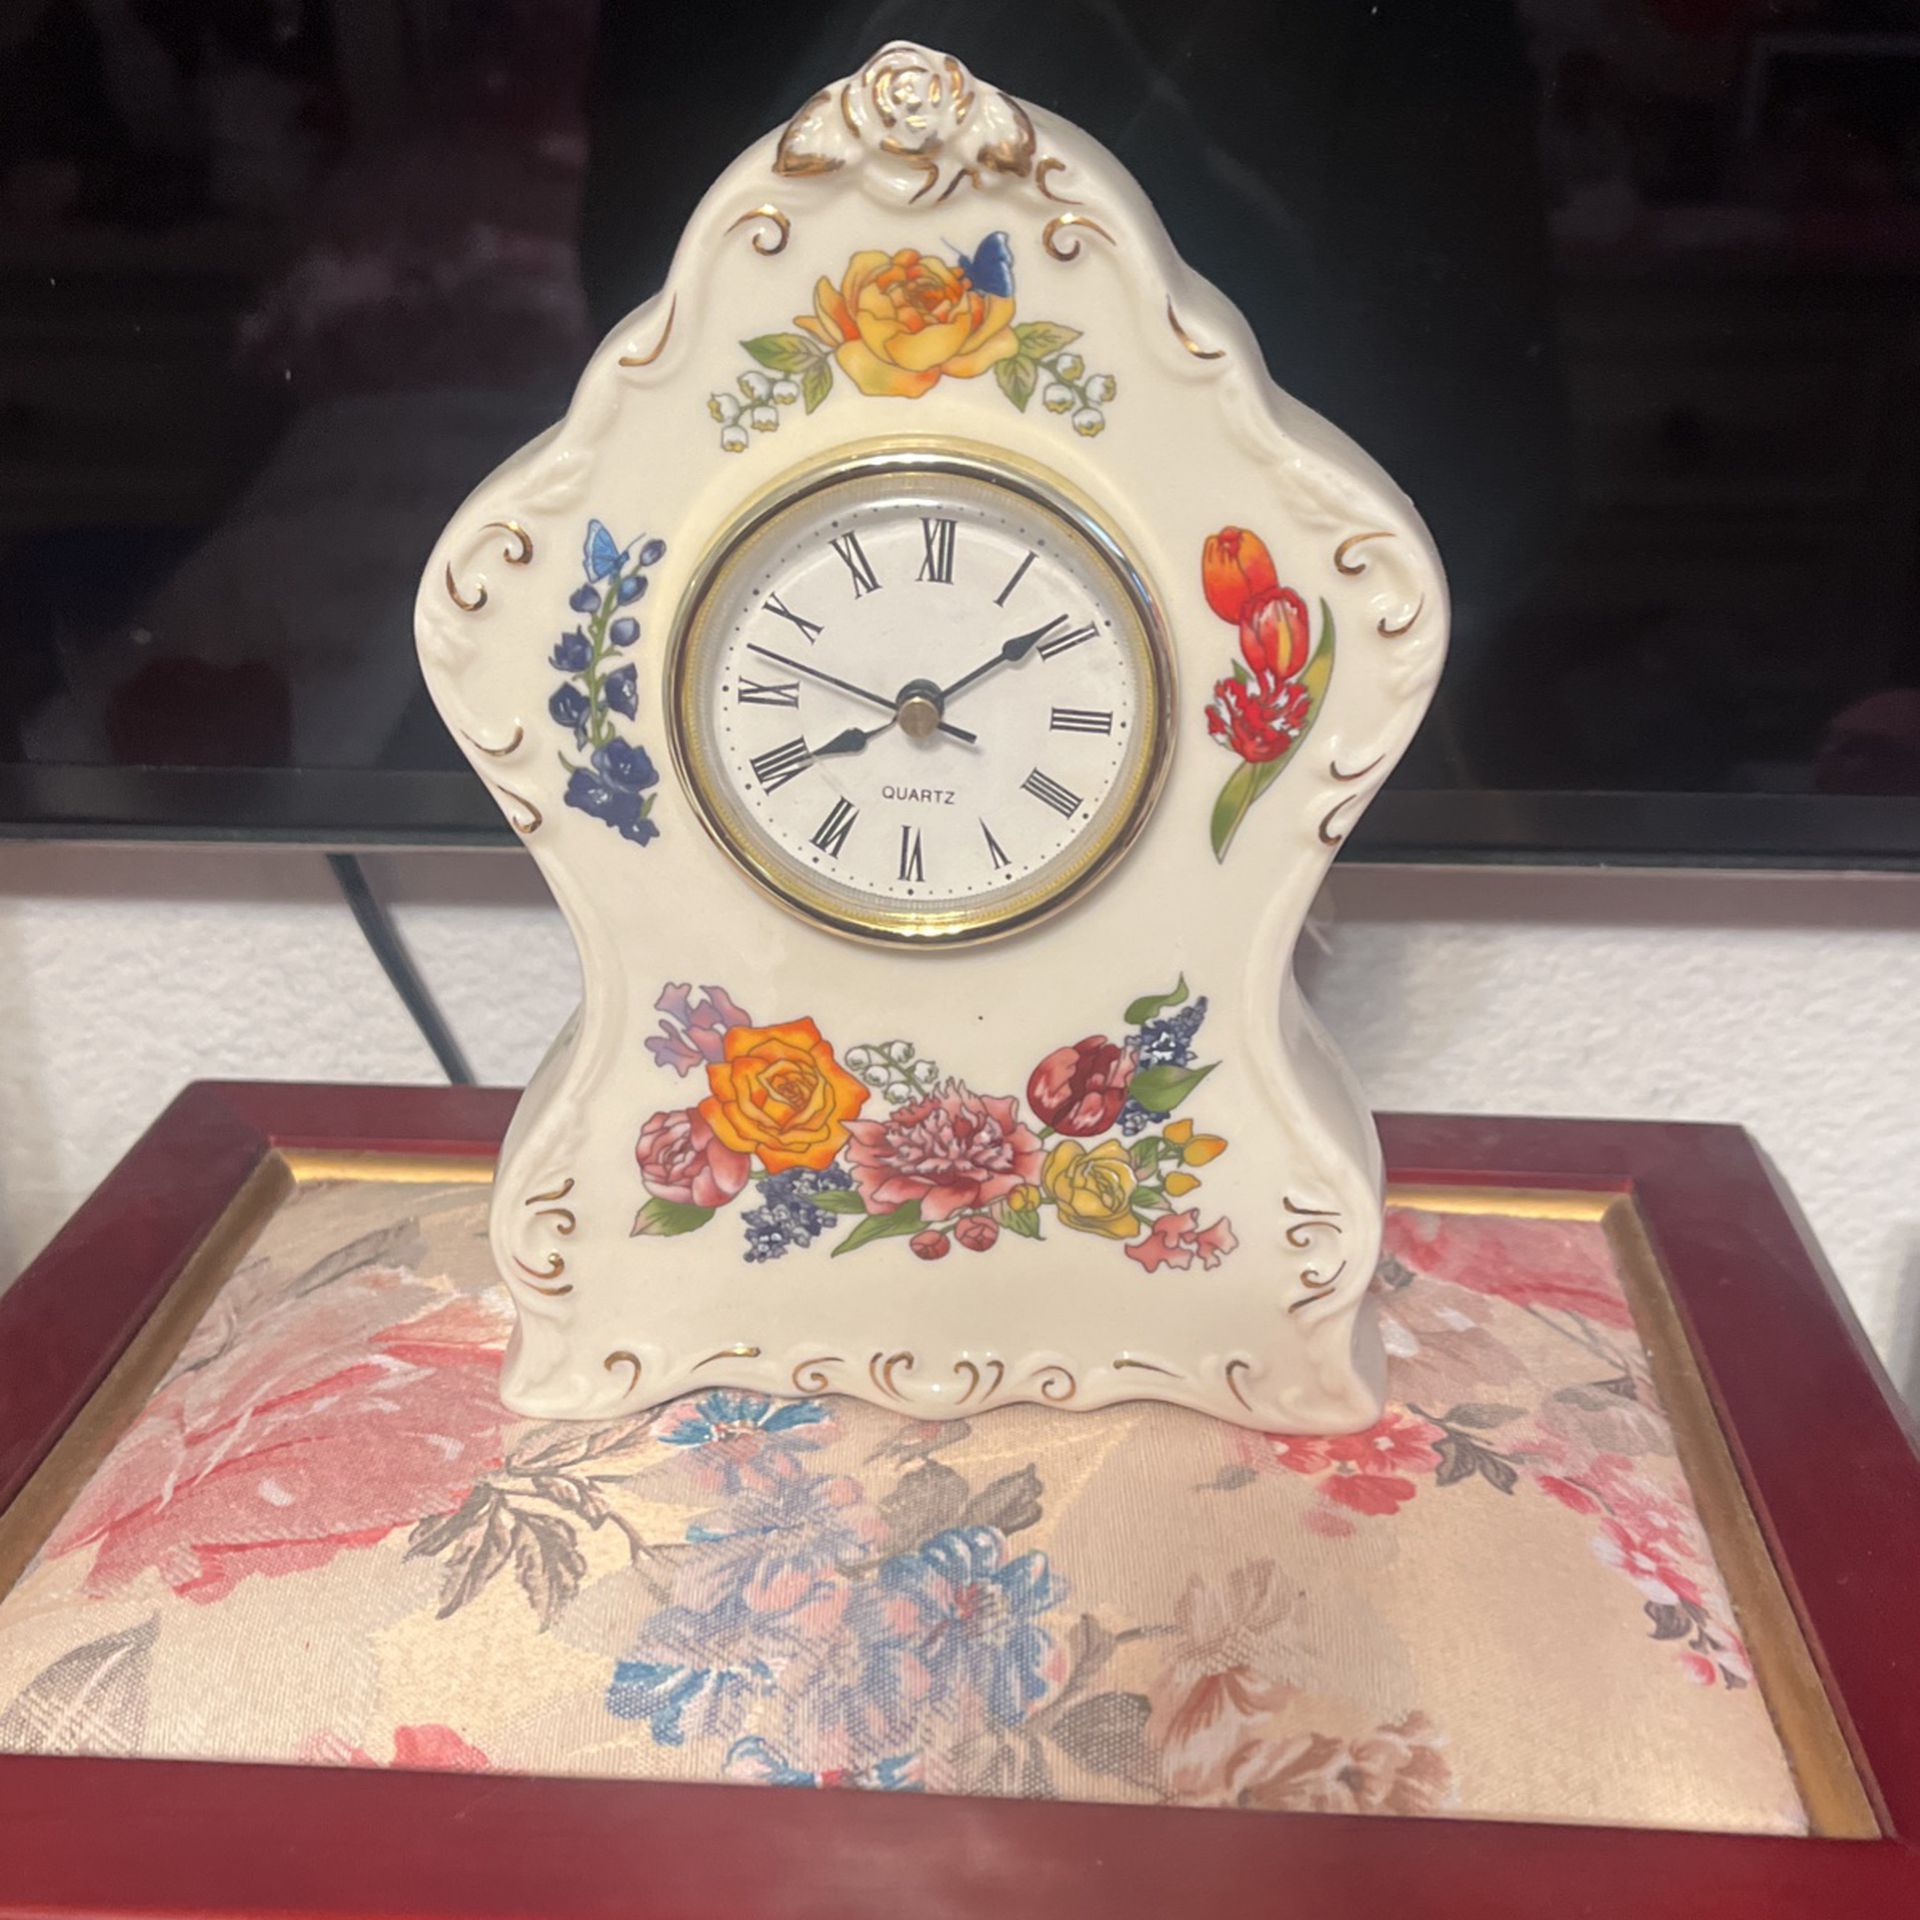 Beautiful Quartz Porcelain Clock Great For Mothers  Day Gift 🎁 